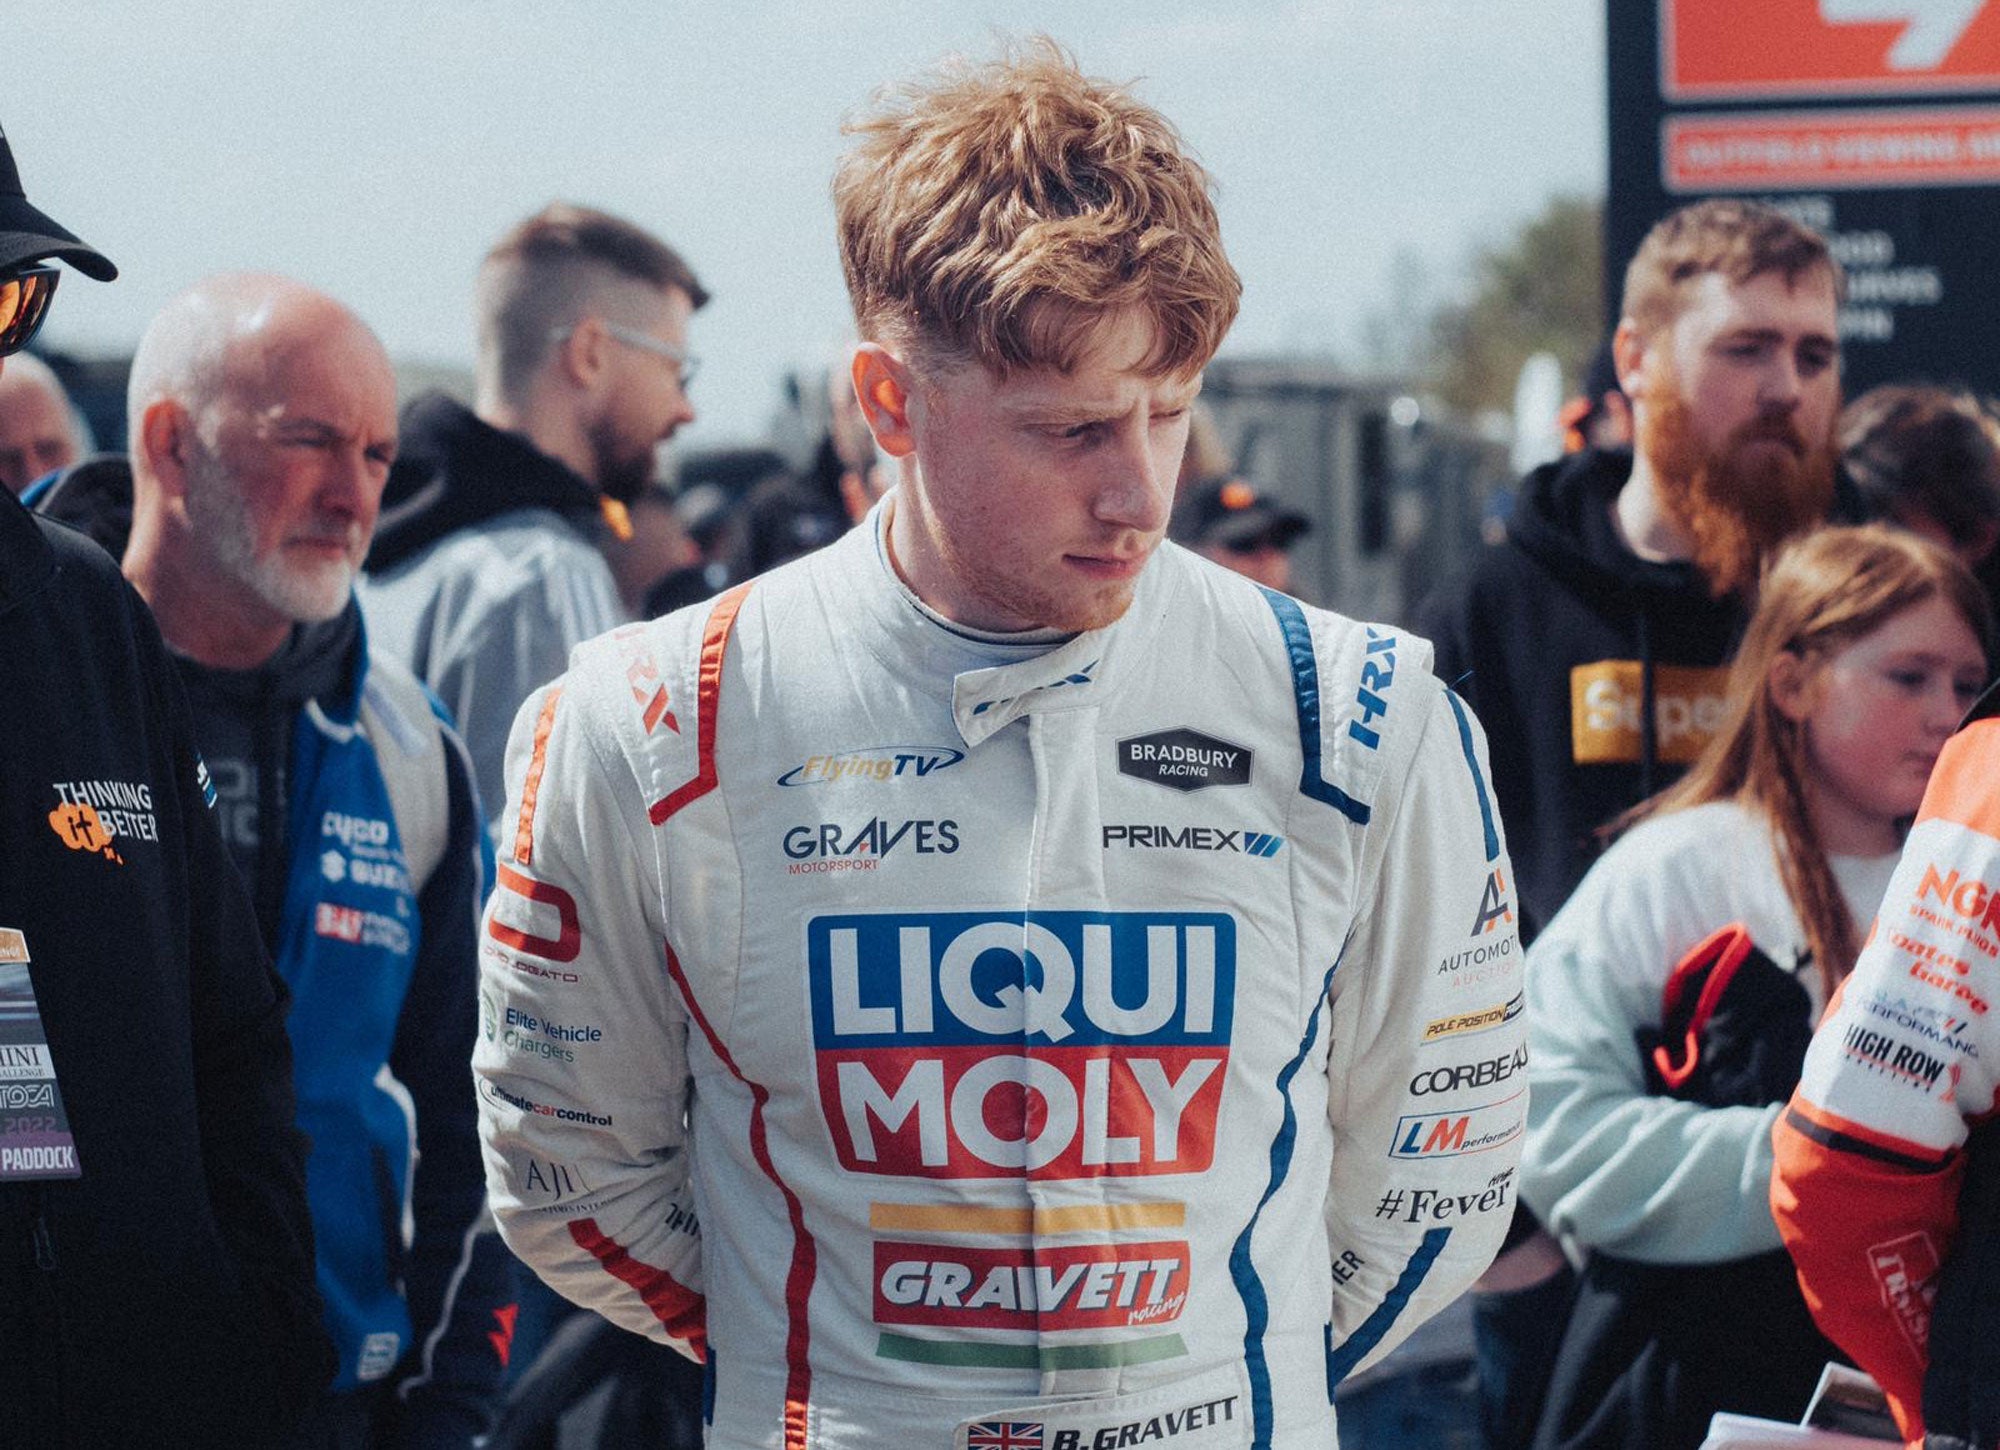 Bradley Gravett son of BTCC British Touring Car Champion Robb Gravett in the MINI Challenge JCW Series at Donington in 2022 Just About to Get into Race Car Graves Motorsport Cooper Racing Driver LIQUI MOLY LM Performance Thinking it Better